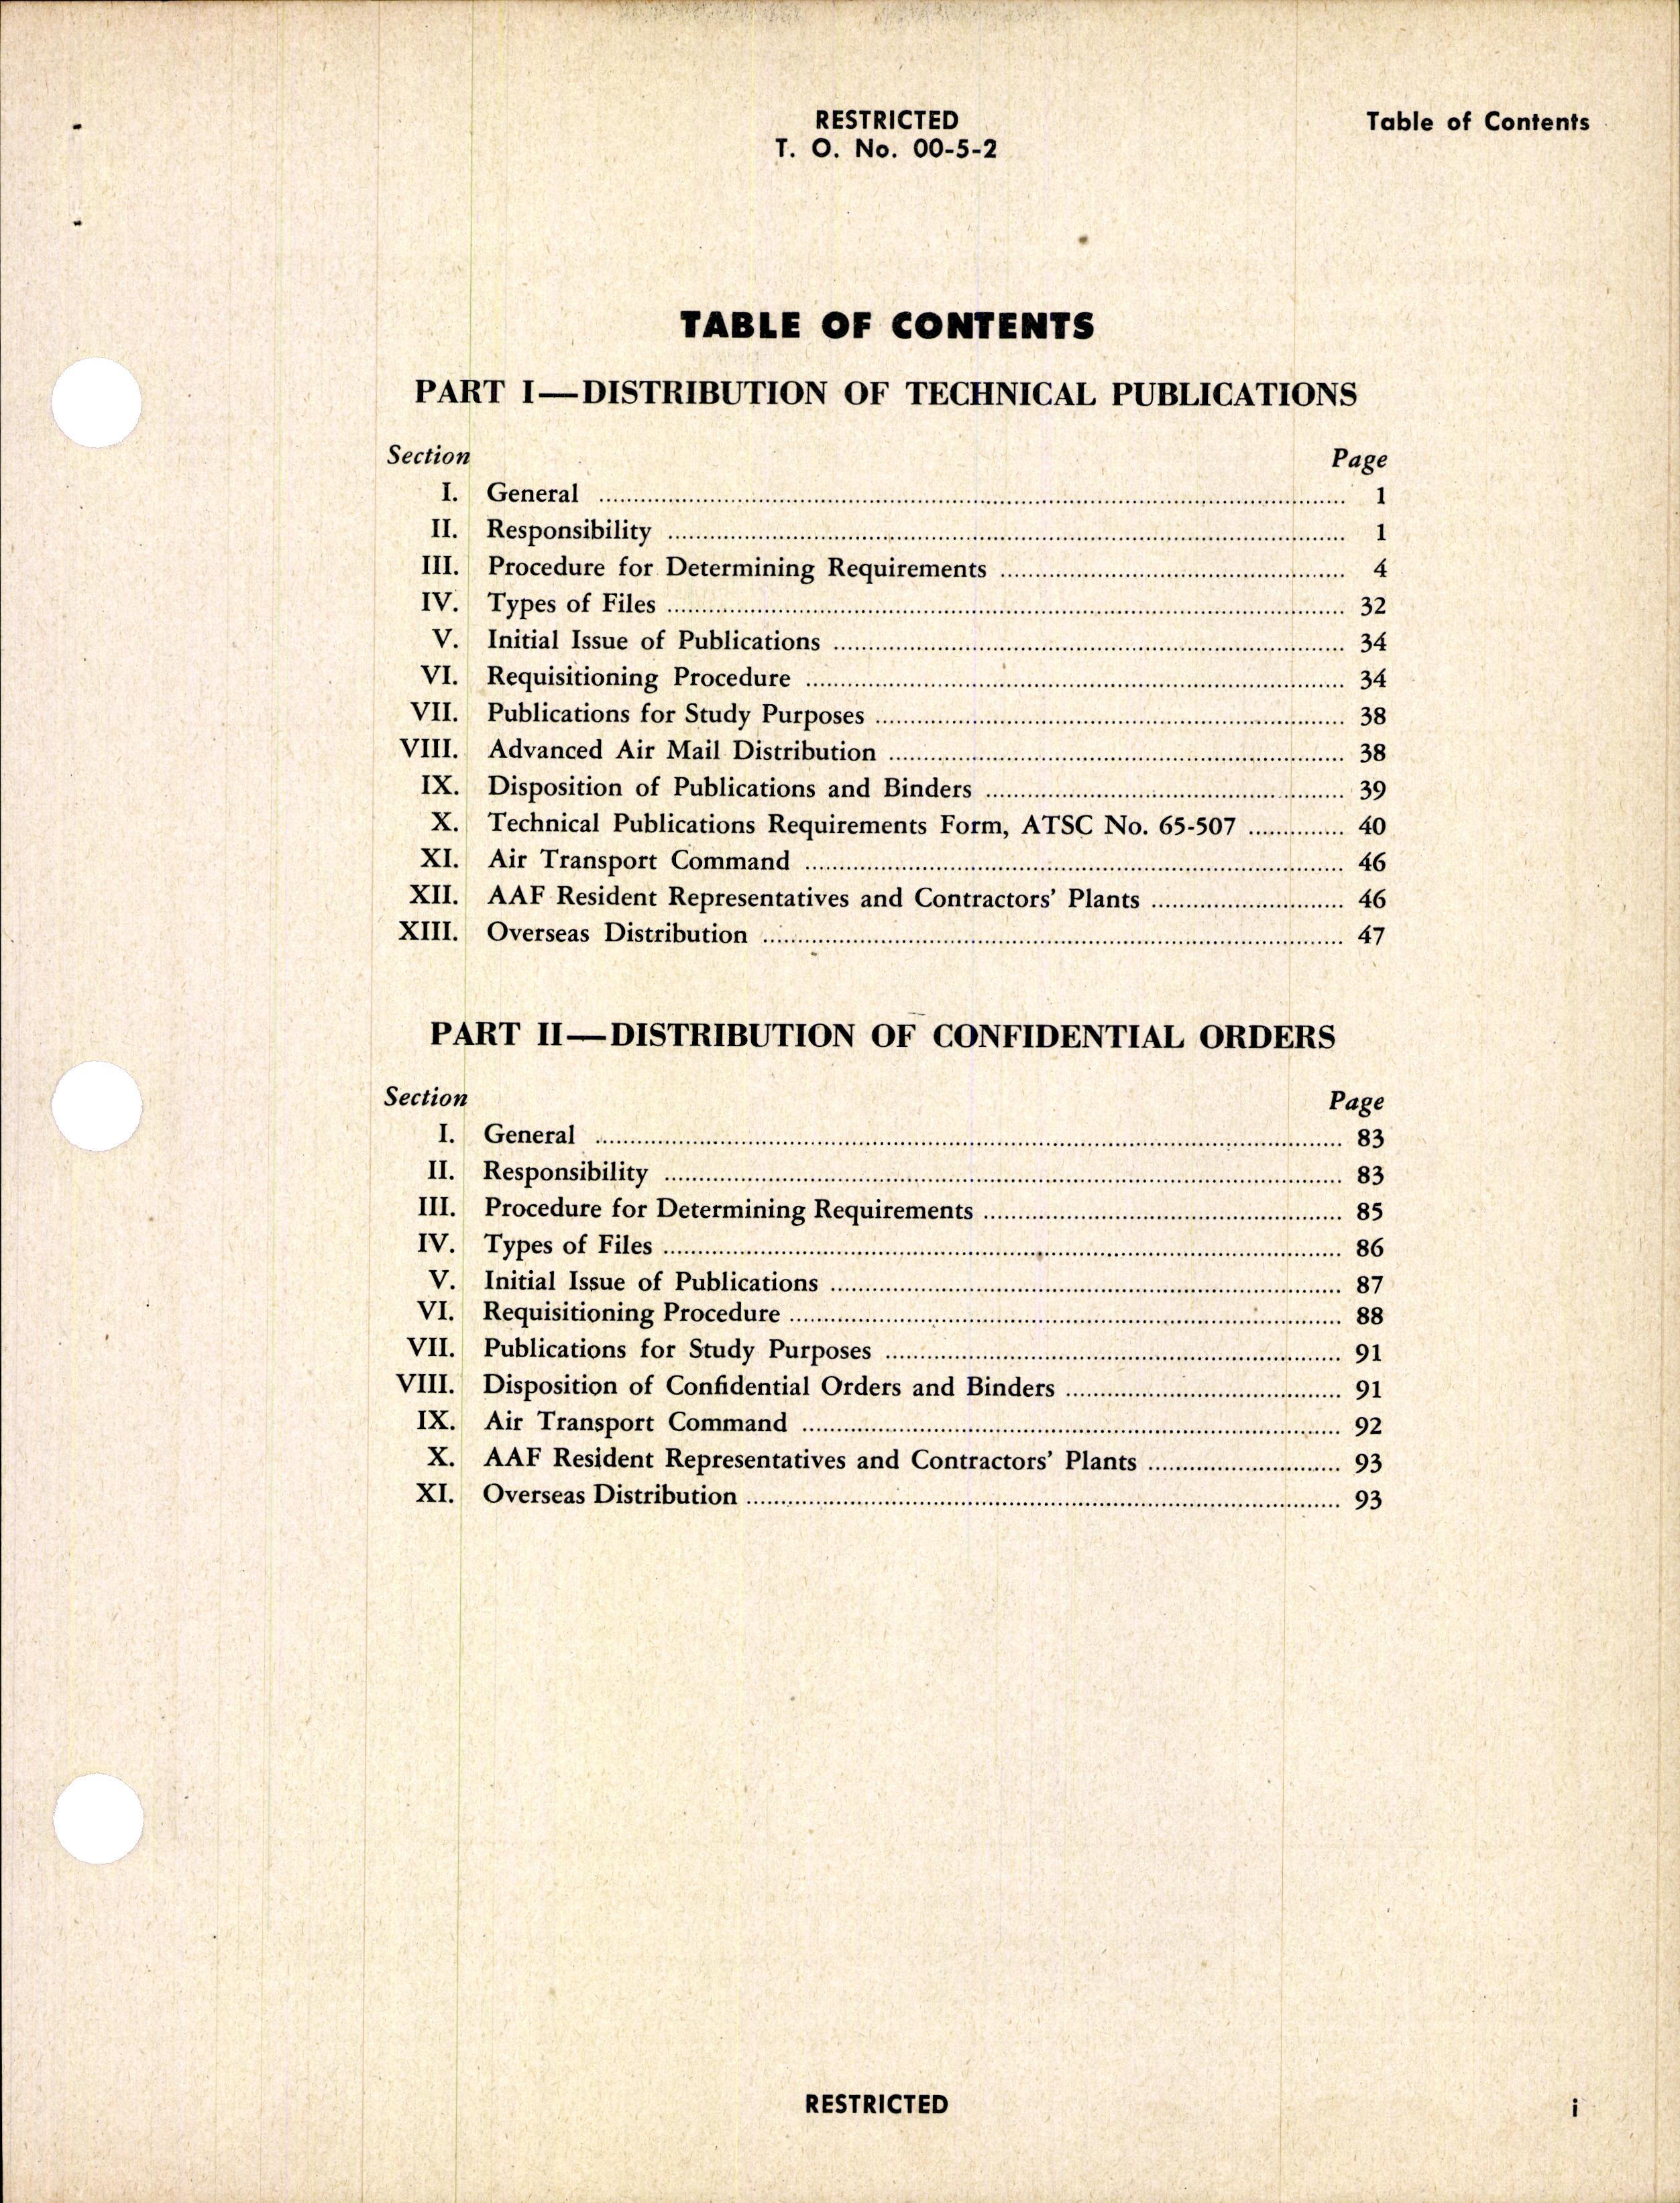 Sample page 3 from AirCorps Library document: Distribution of Technical Publications